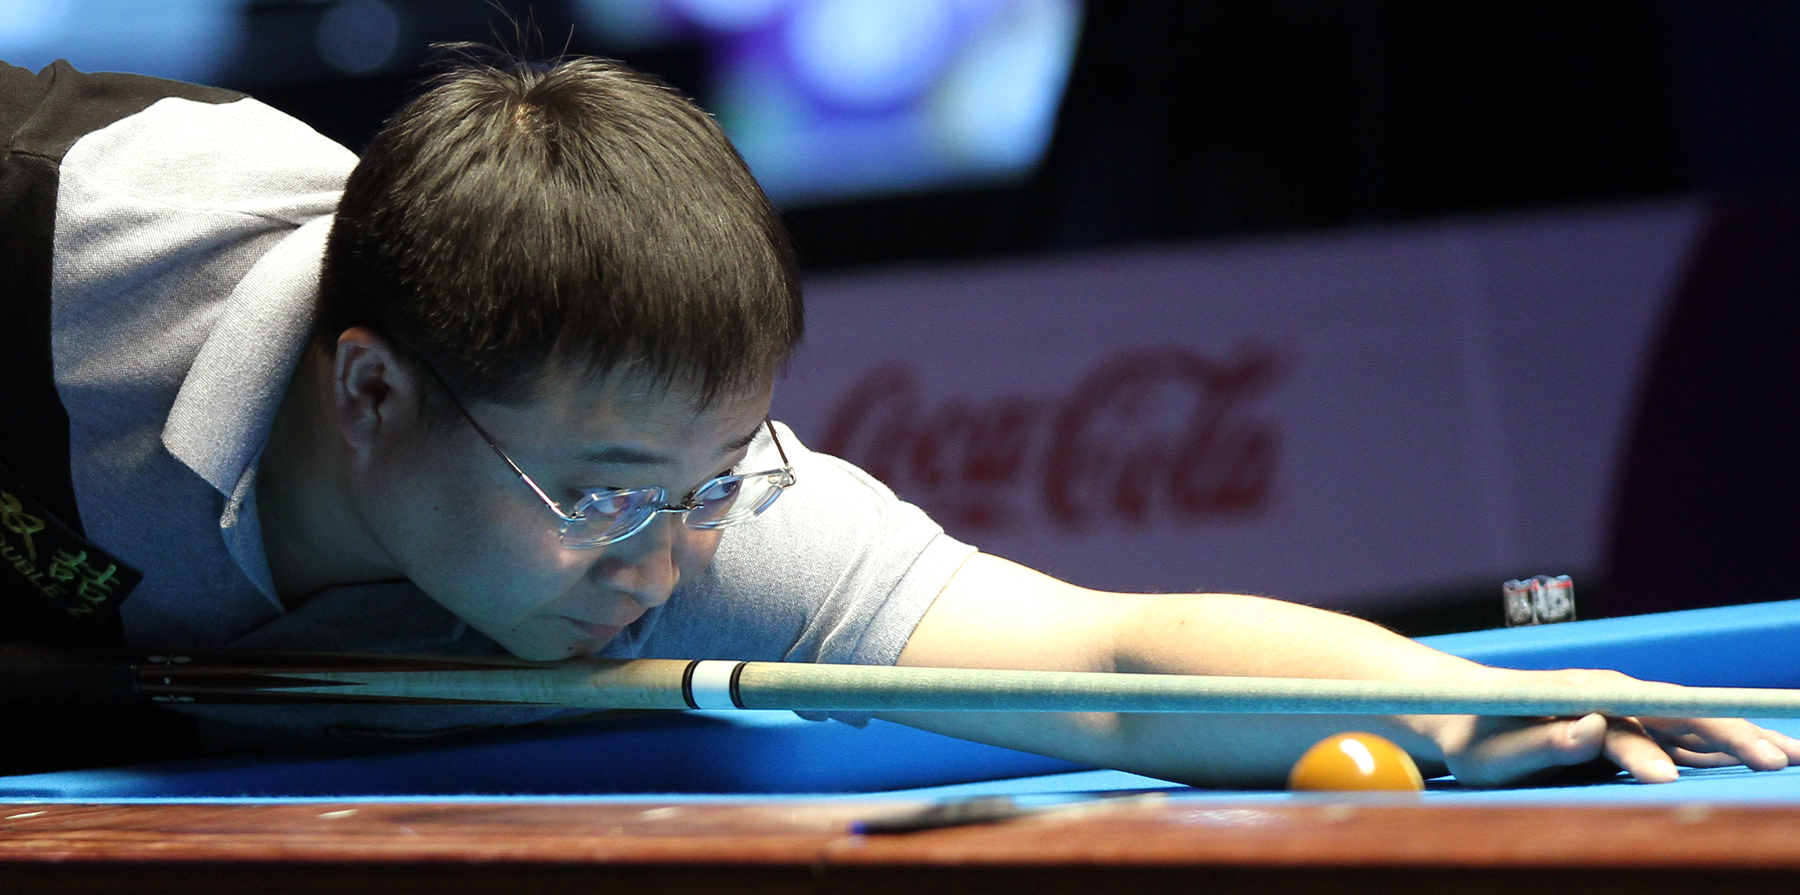 man in glasses playing pool on a blue table